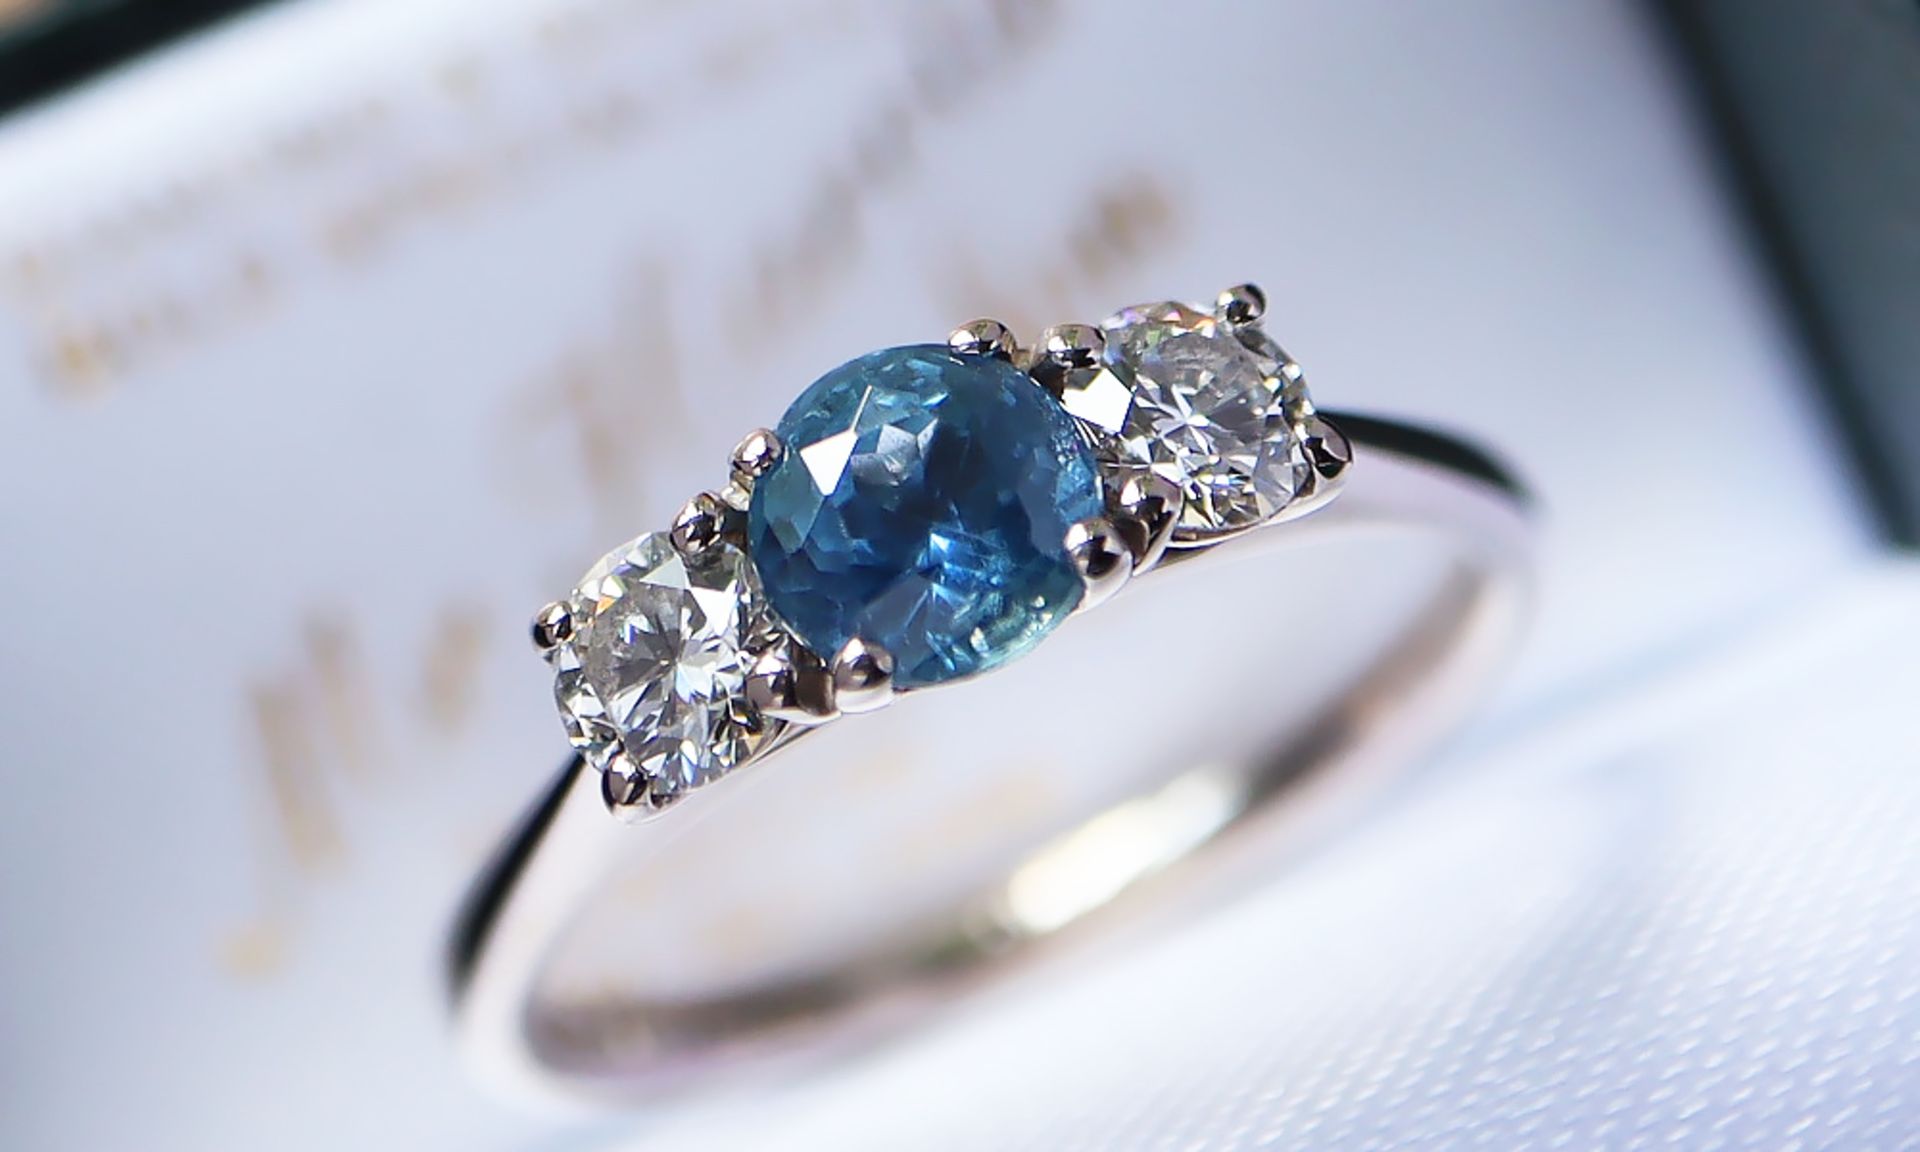 STUNNING 1.150CT 'PEACOCK BLUE' SAPPHIRE & DIAMOND TRILOGY RING - in 18K GOLD - Image 2 of 5